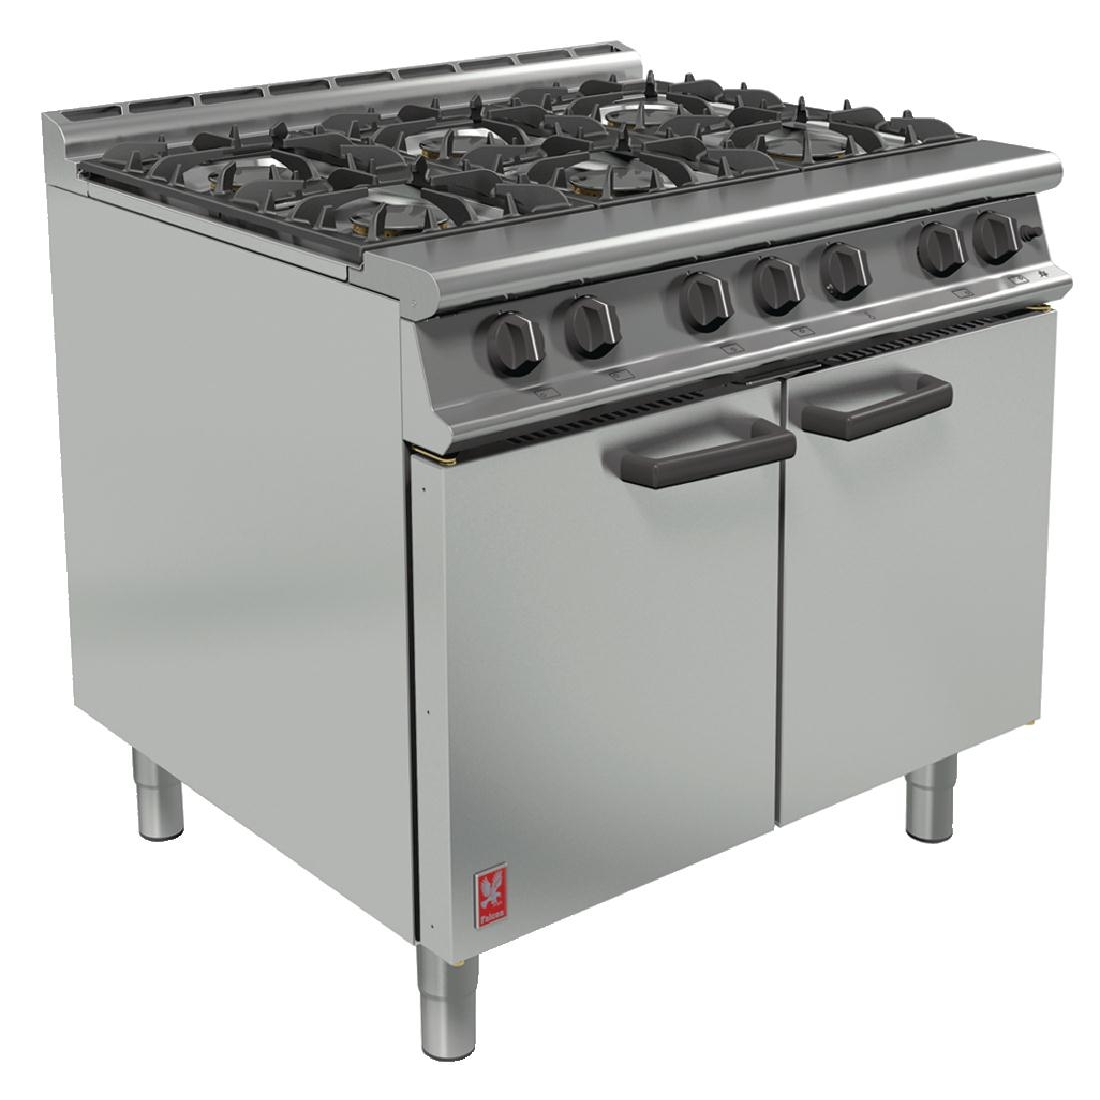 Falcon 6 Burner Dominator Plus Oven Range G3101 Natural Gas with Feet